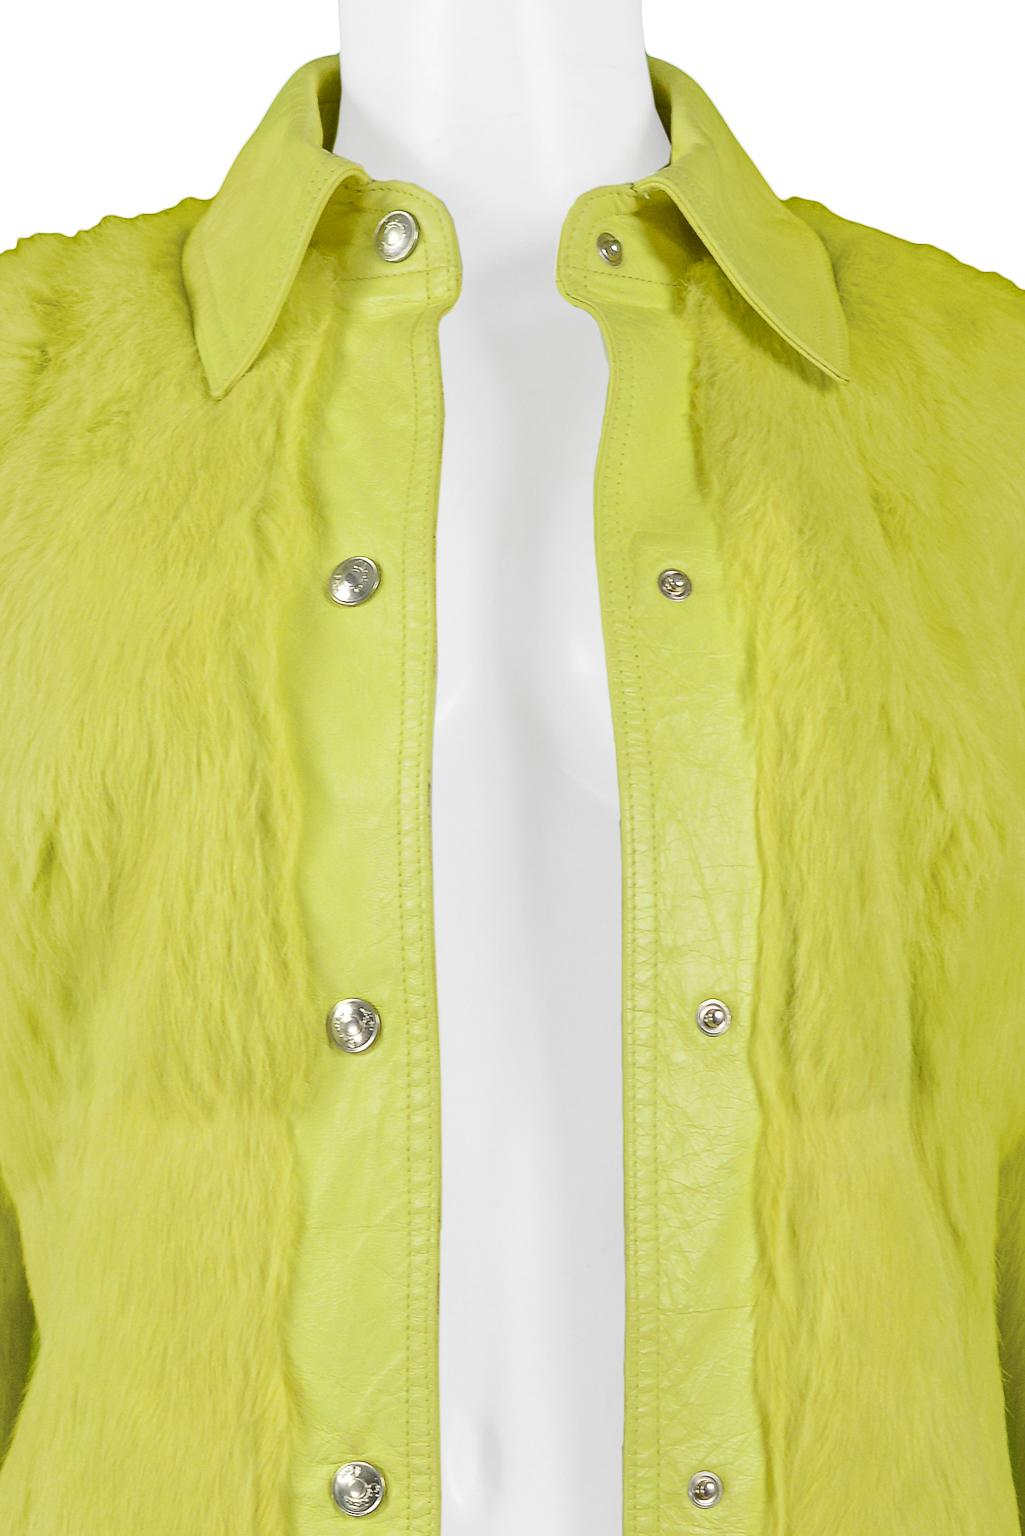 Yellow Leather Jackets - 9 For Sale on 1stDibs | yellow biker jackets